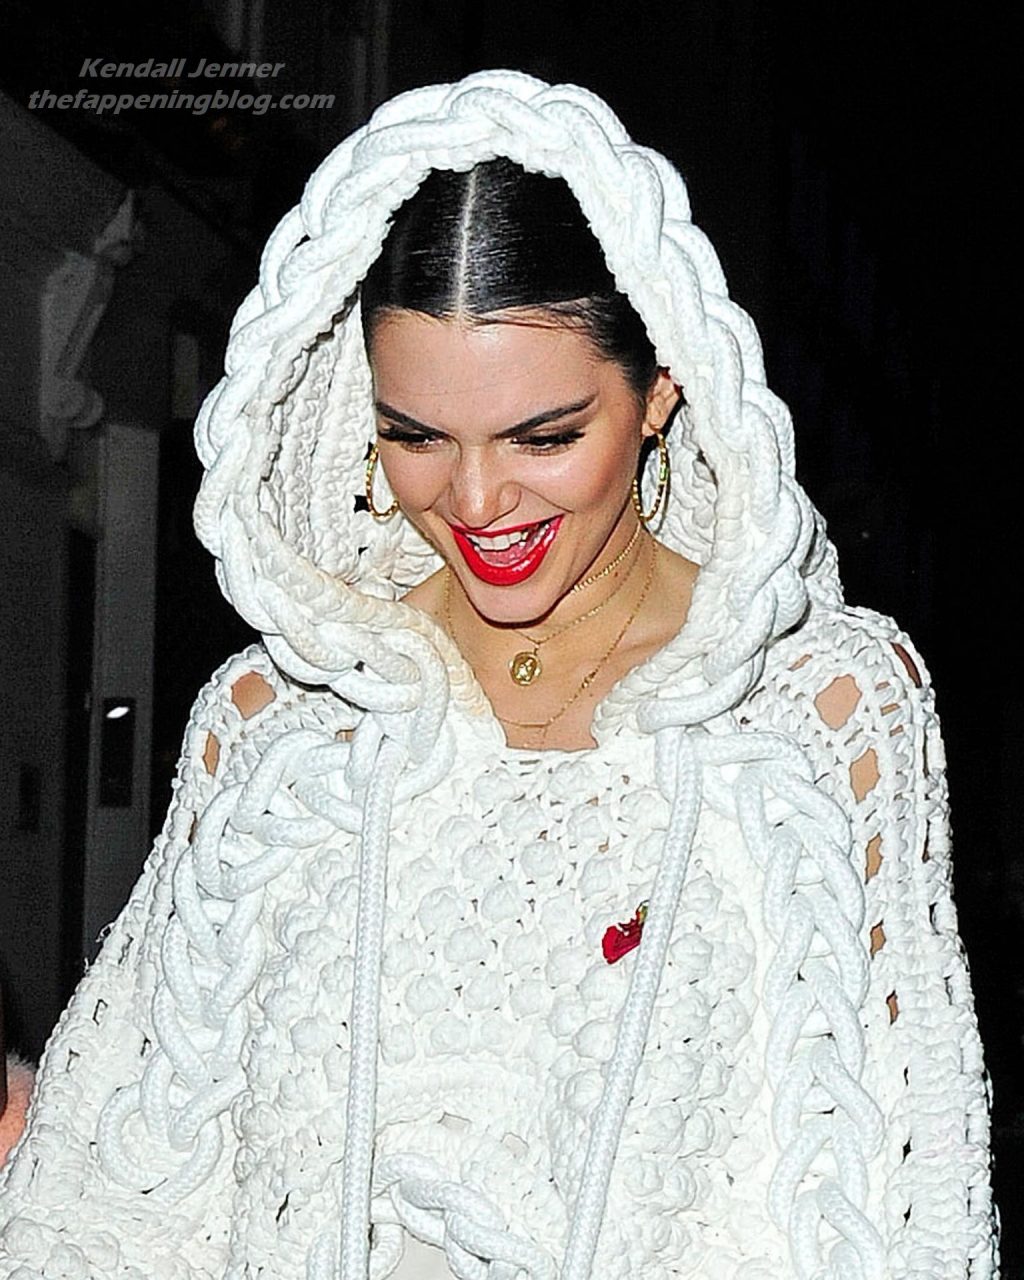 Vogue Staffers Complained of The Title’s Treatment of the Photos of Kendall Jenner’s Gold Tooth (43 Pics)